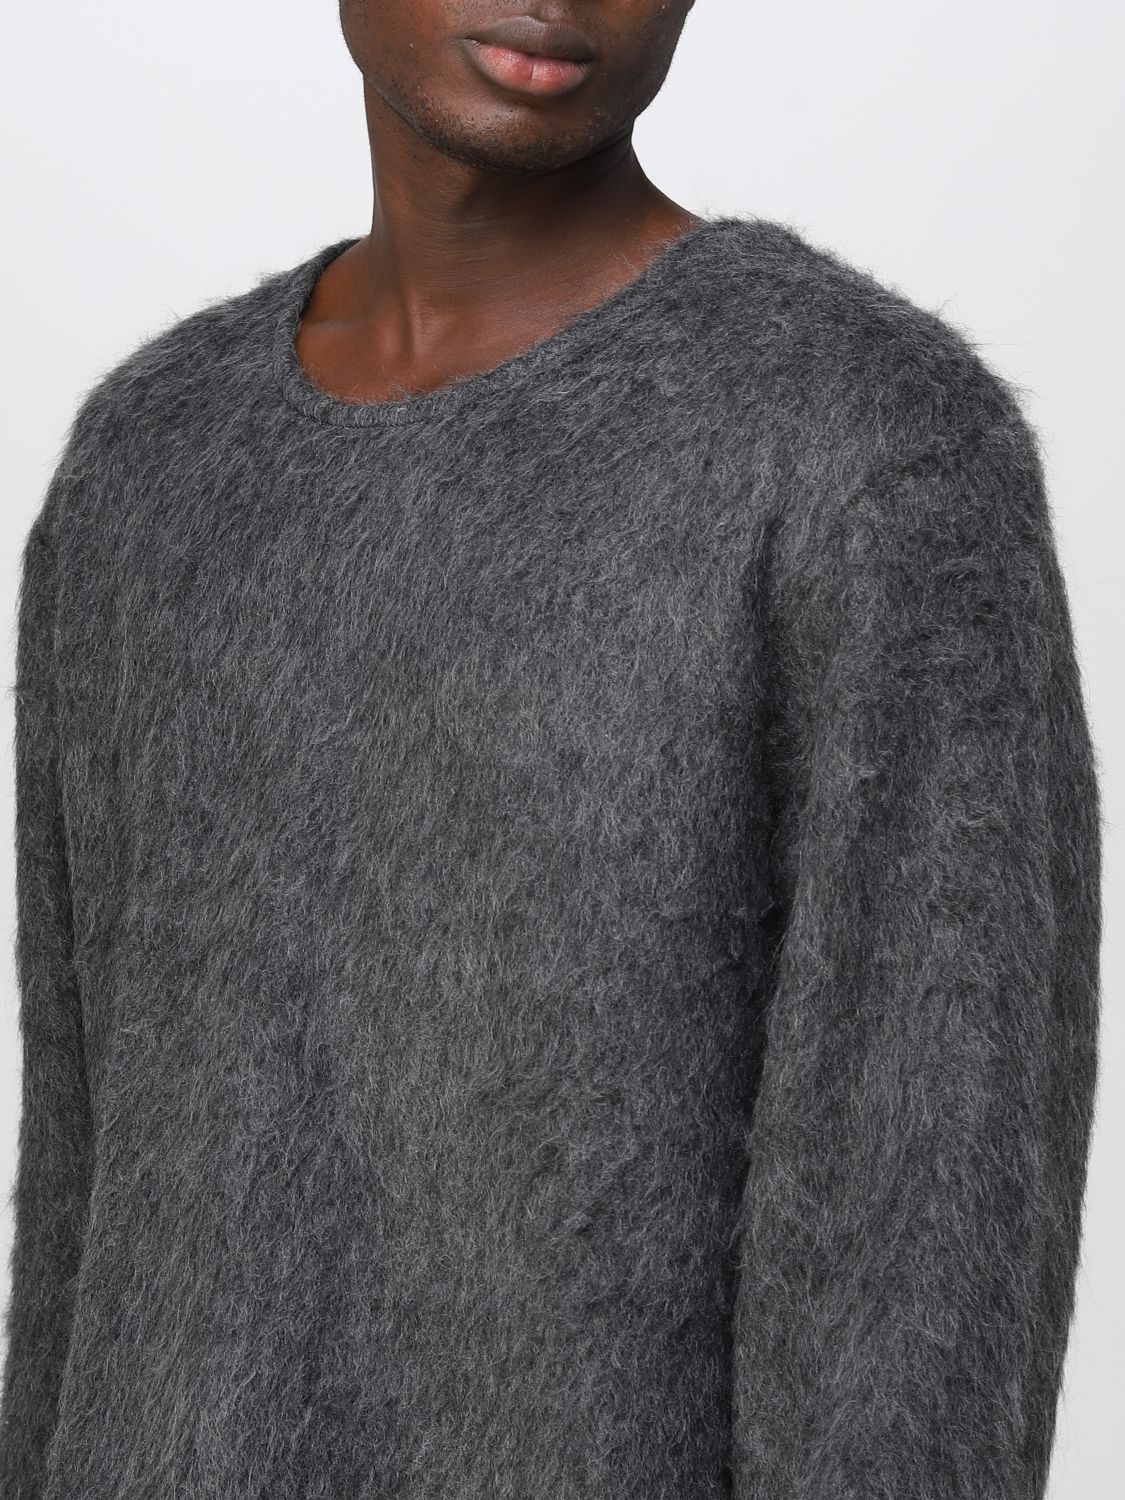 Sweater Our Legacy: Our Legacy sweater for man grey 4